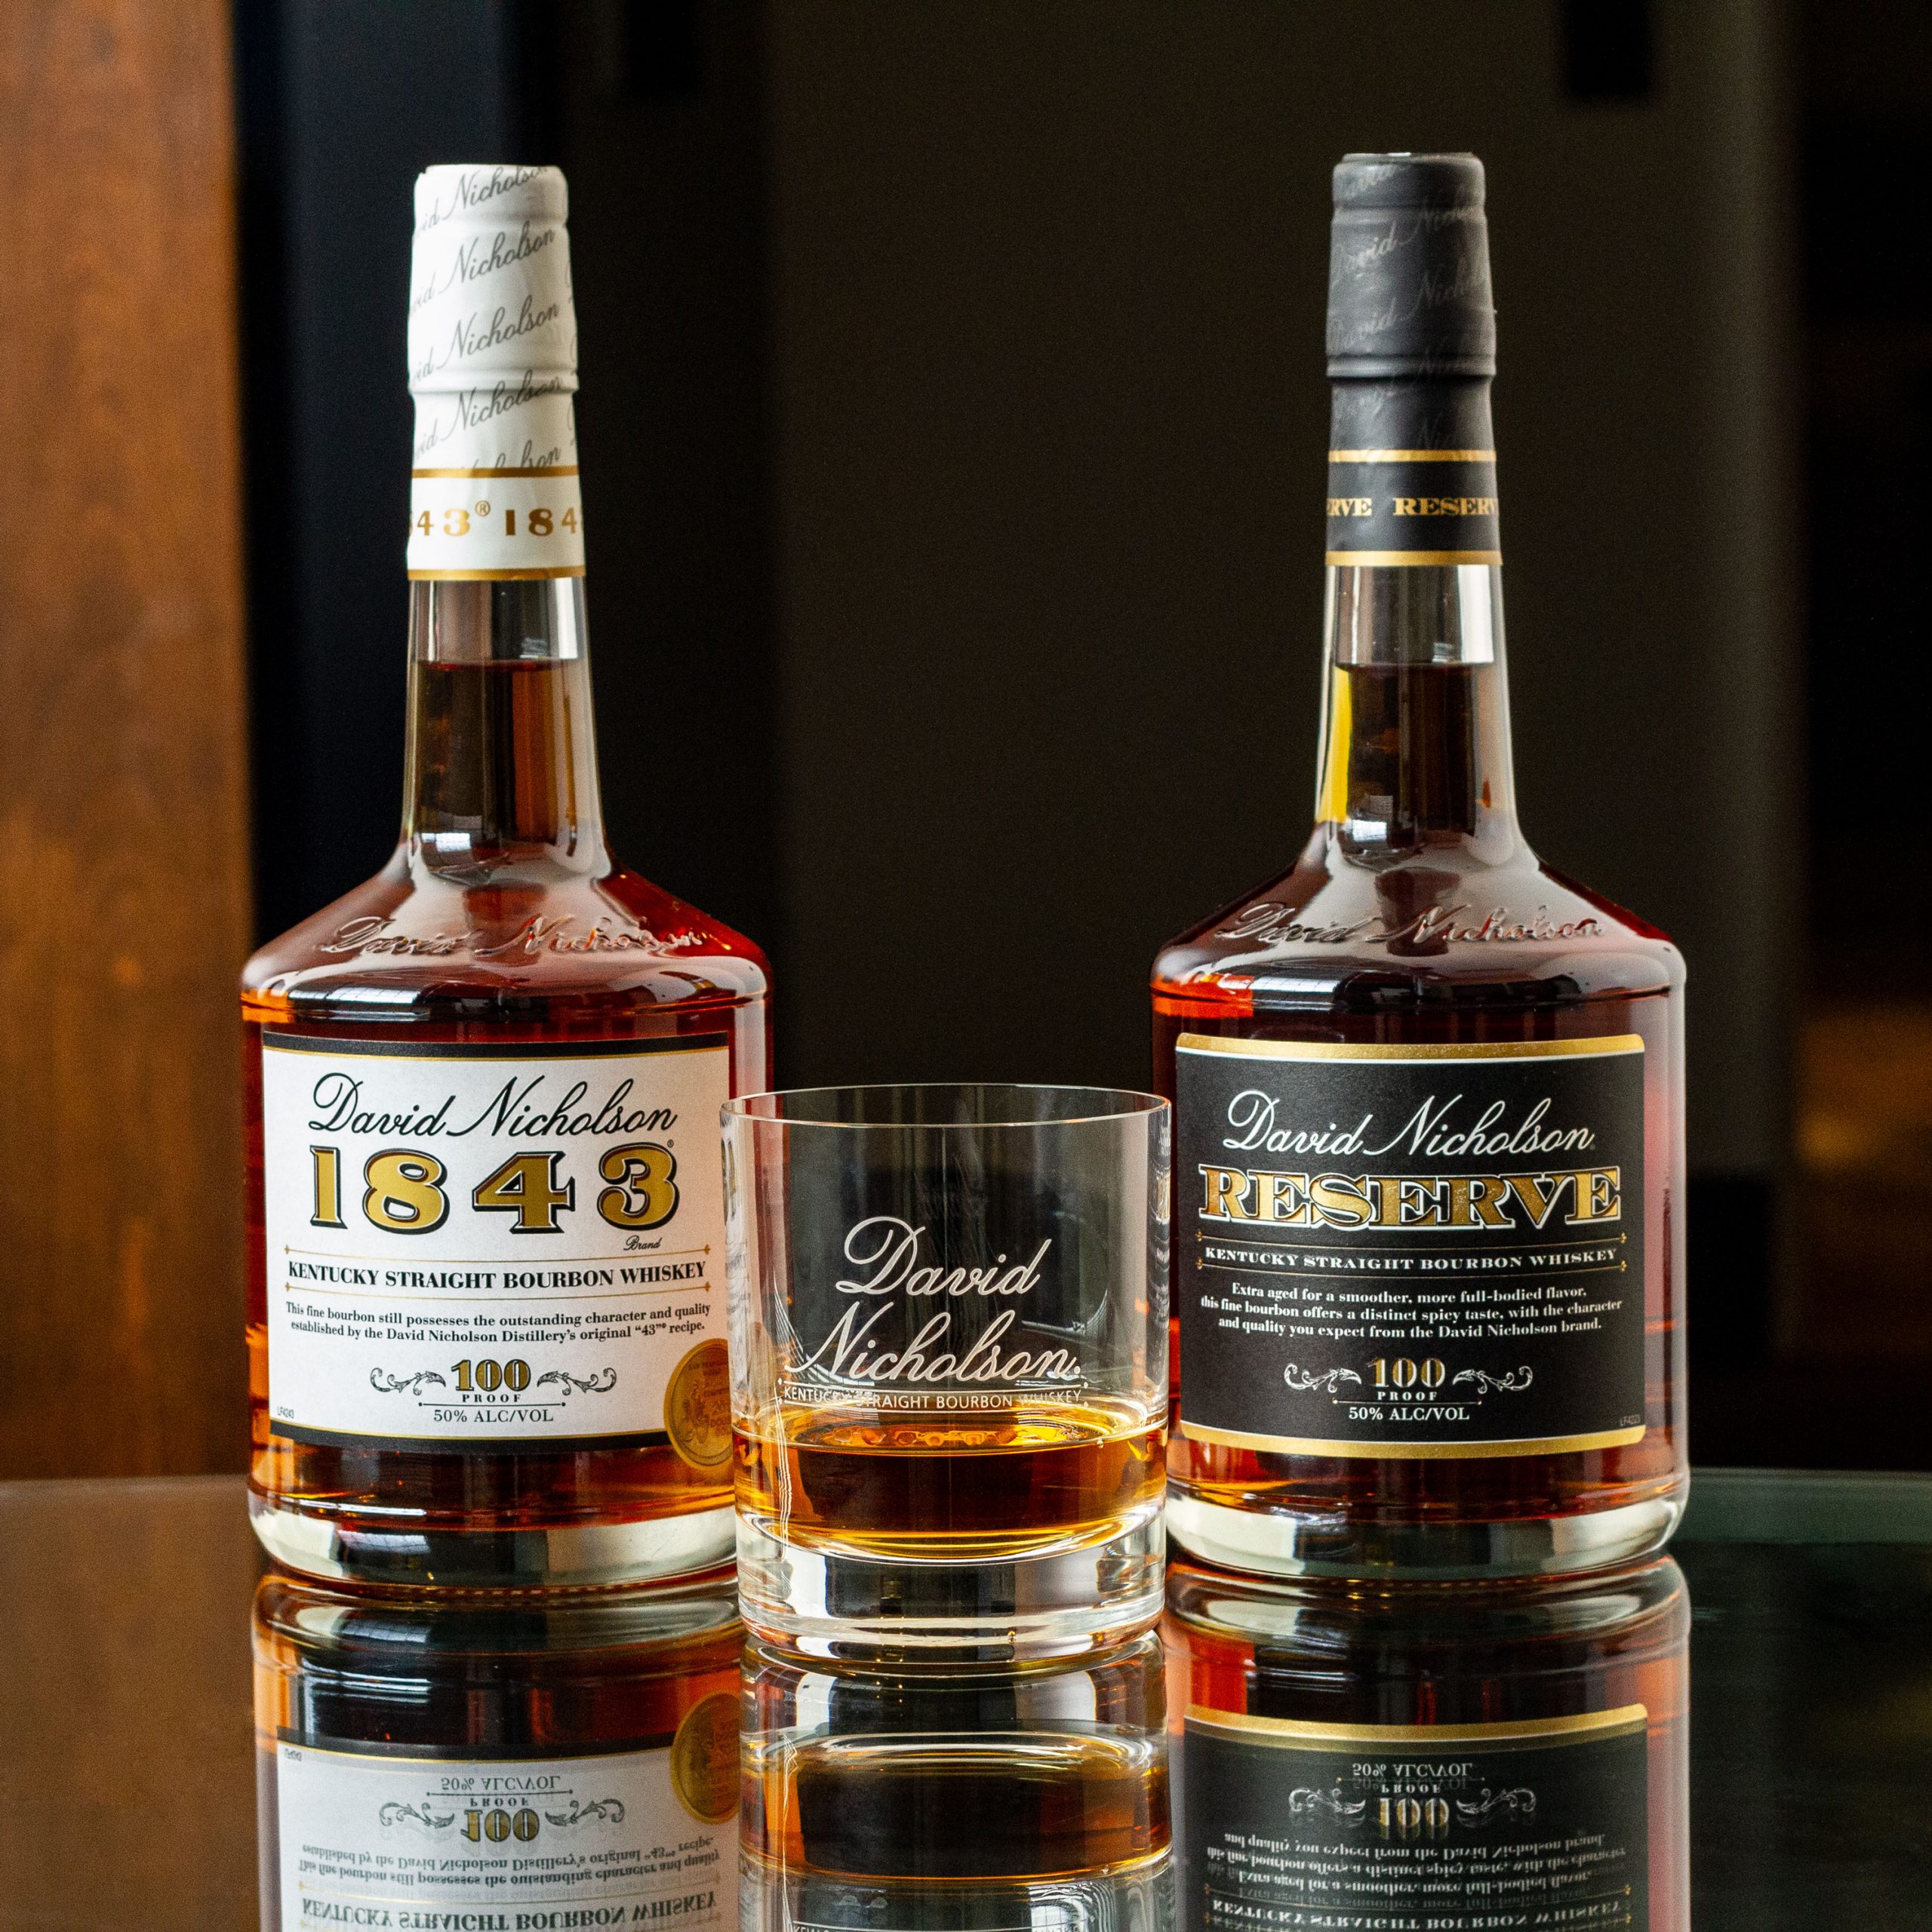 Advanced Bourbon Tasting: How to Build a Better, More Refined Palate